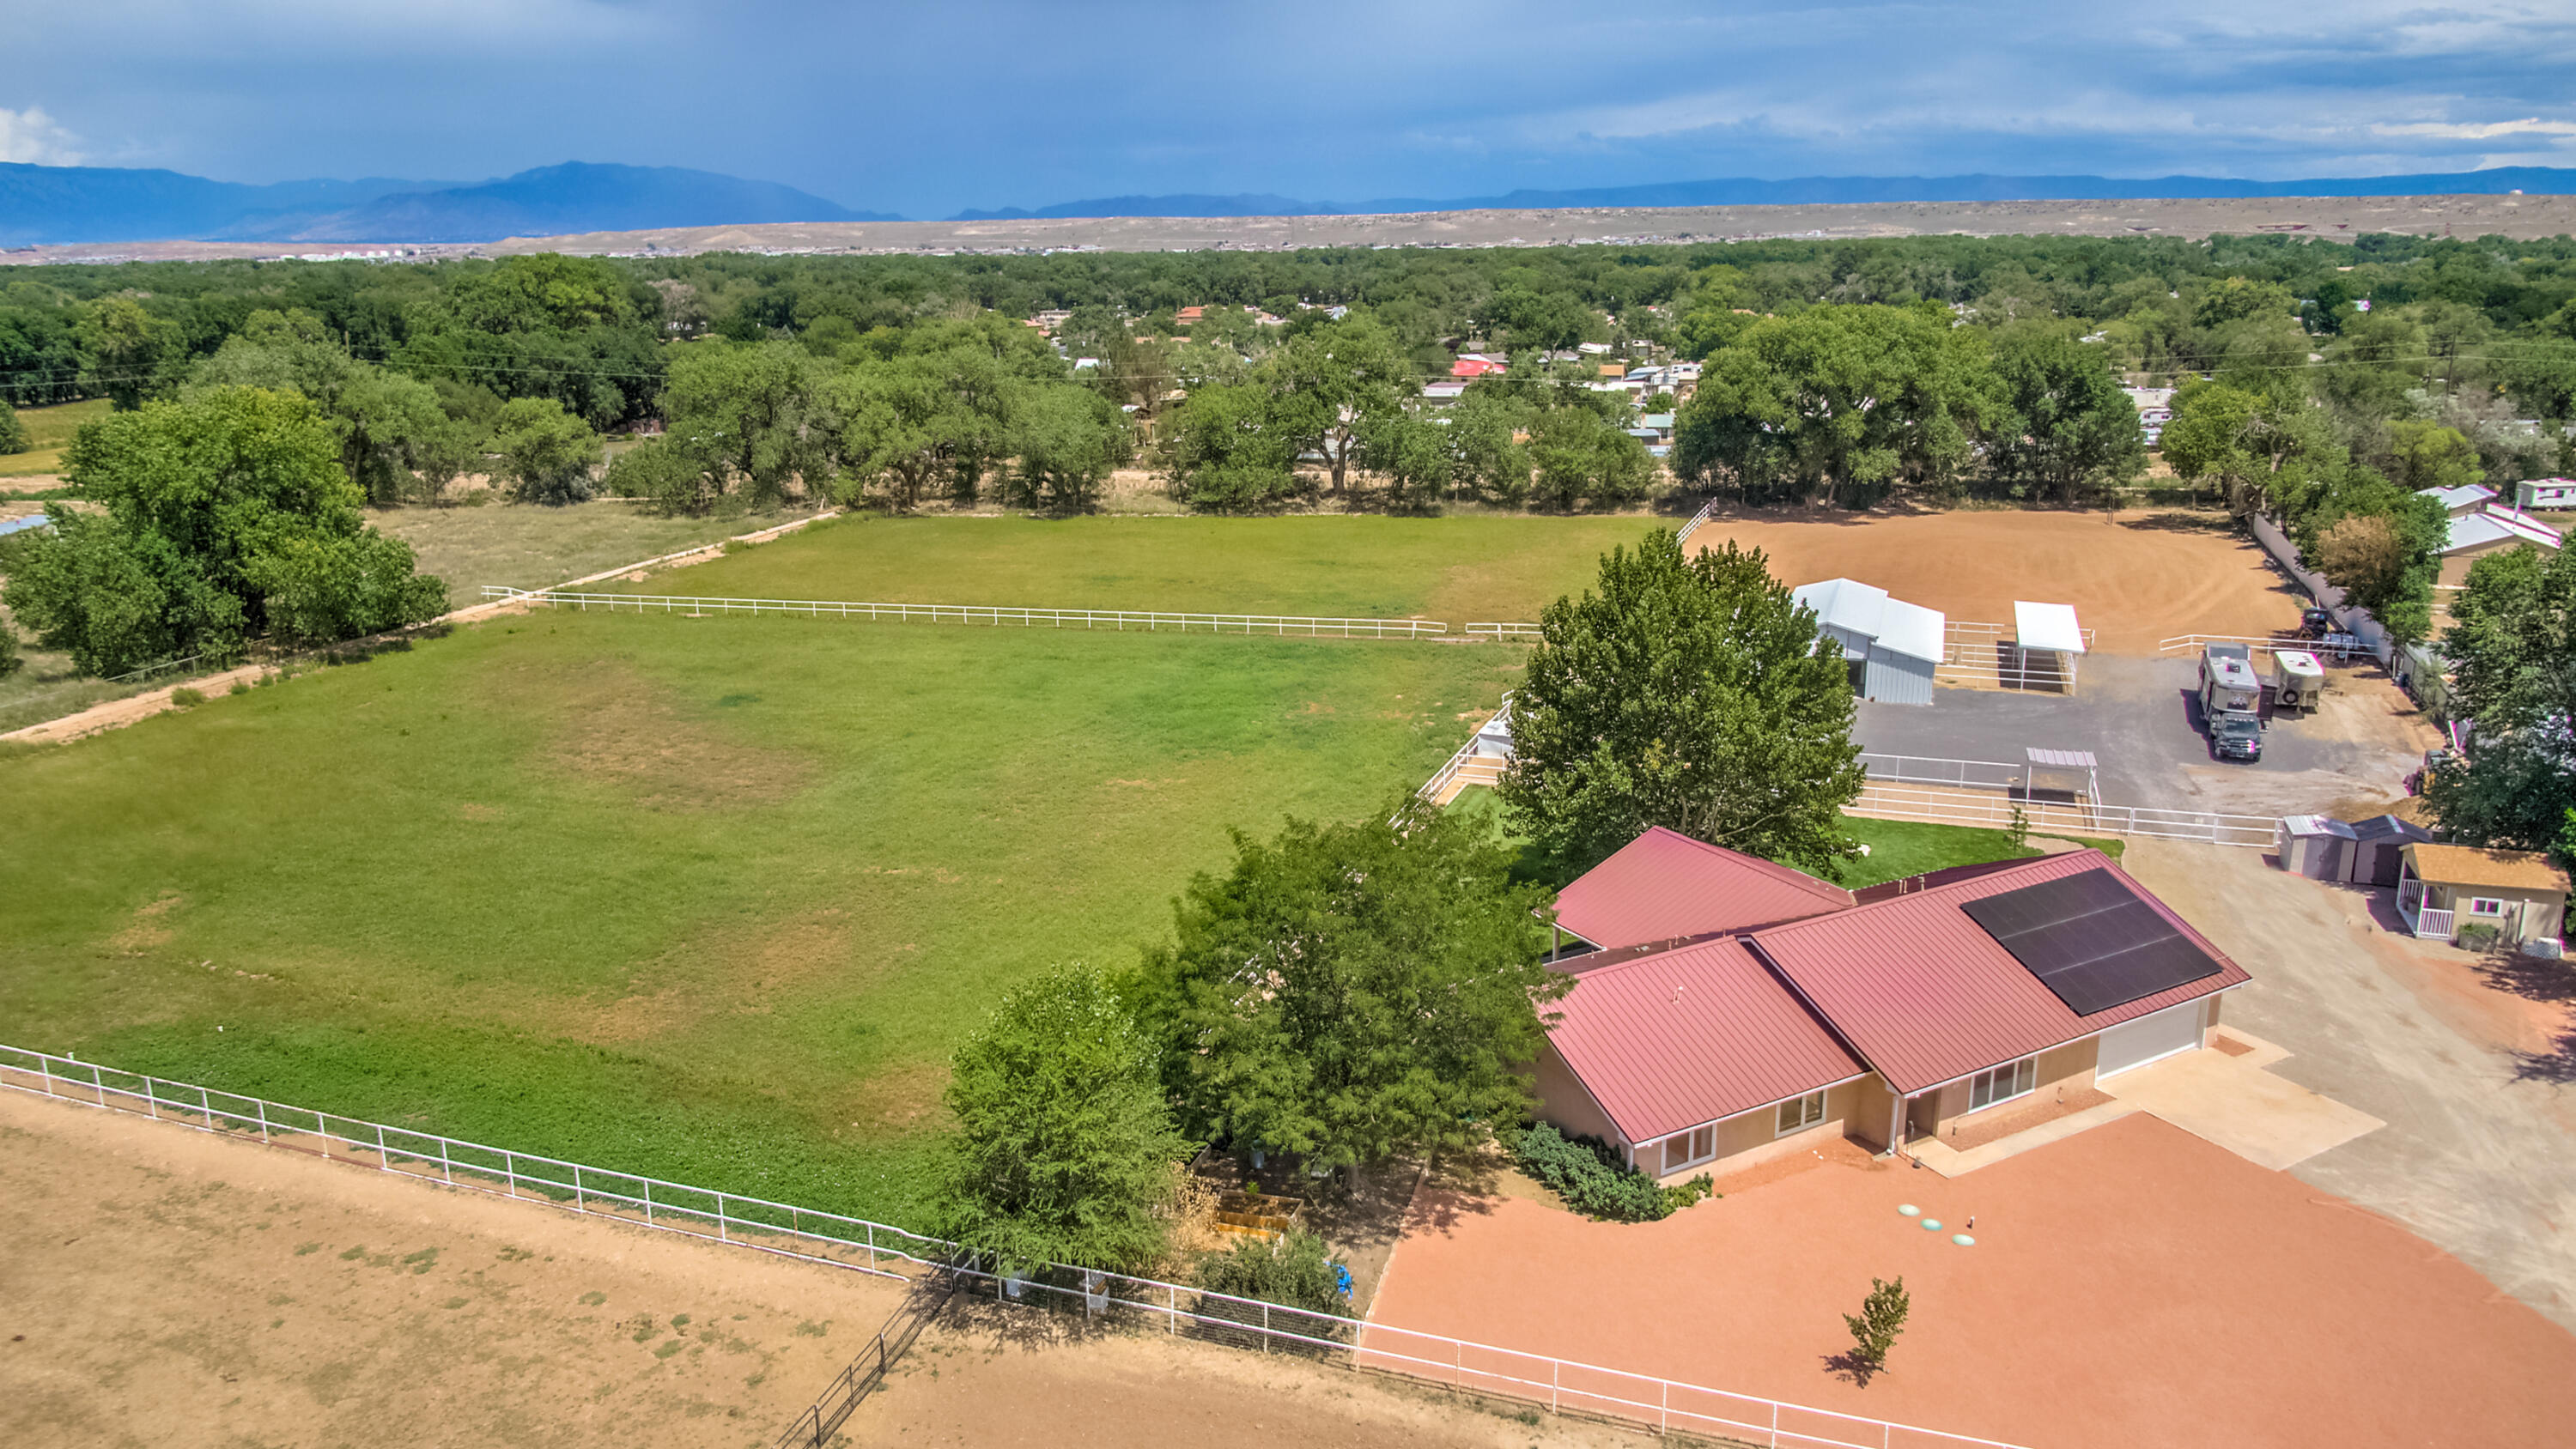 Bring the horses!  This fabulous farm is ''turn key'' for the equestrian.  Situated on 4.85 acres,  irrigated pastures, large arena, 5 stall barn, tack w/laundry, wash area, hay storage, turn outs, pipe fencing and privacy!   Ranch style 3BR home w/2 living areas, 2BA, mud room, heated/cooled 2 CGar, sauna, solar panels owned & generator system. Separate office. Beautifully designed home offers an open floor plan which makes this a great house for living & entertainment.  The kitchen features a large island, gas stove, oak cabinets and granite countertops w access to the large back patio, plus view of the horses.  This  well-maintained property is  completely fenced with a gated entry.  Great location  within minutes to I-25 off Isleta.  Access to trails for riding, biking, or walking.